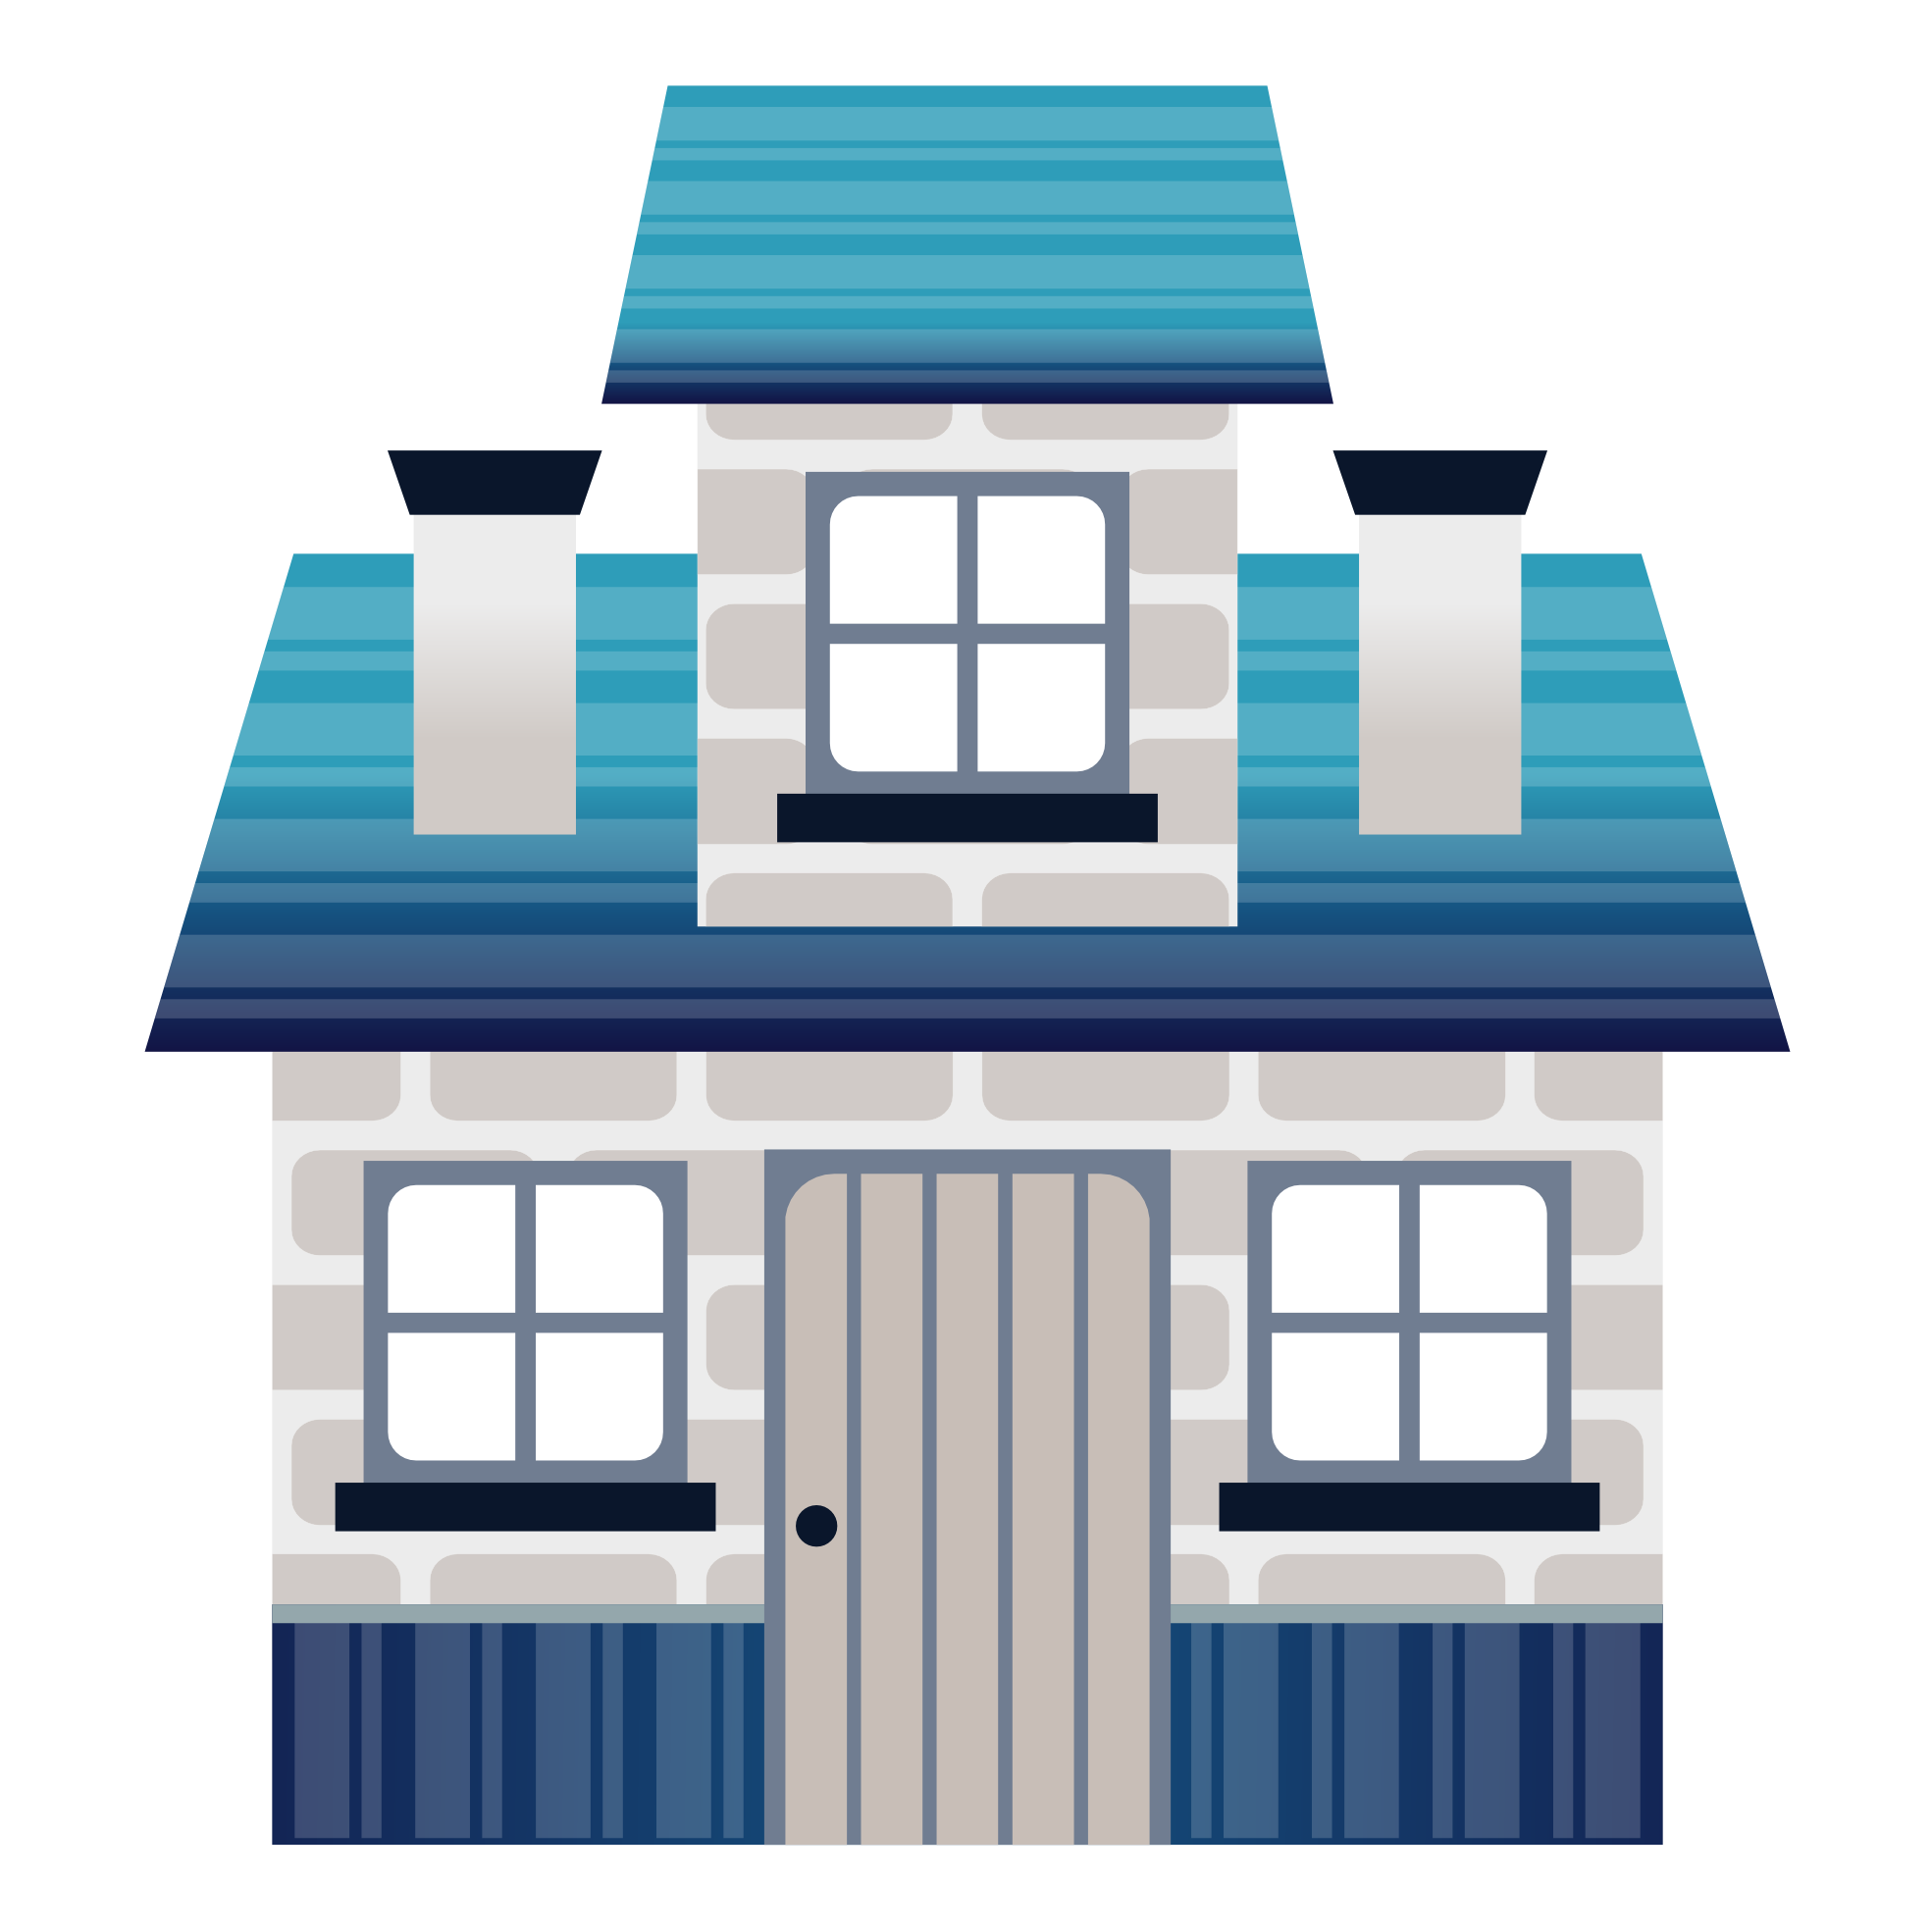 free vector house clipart - photo #38